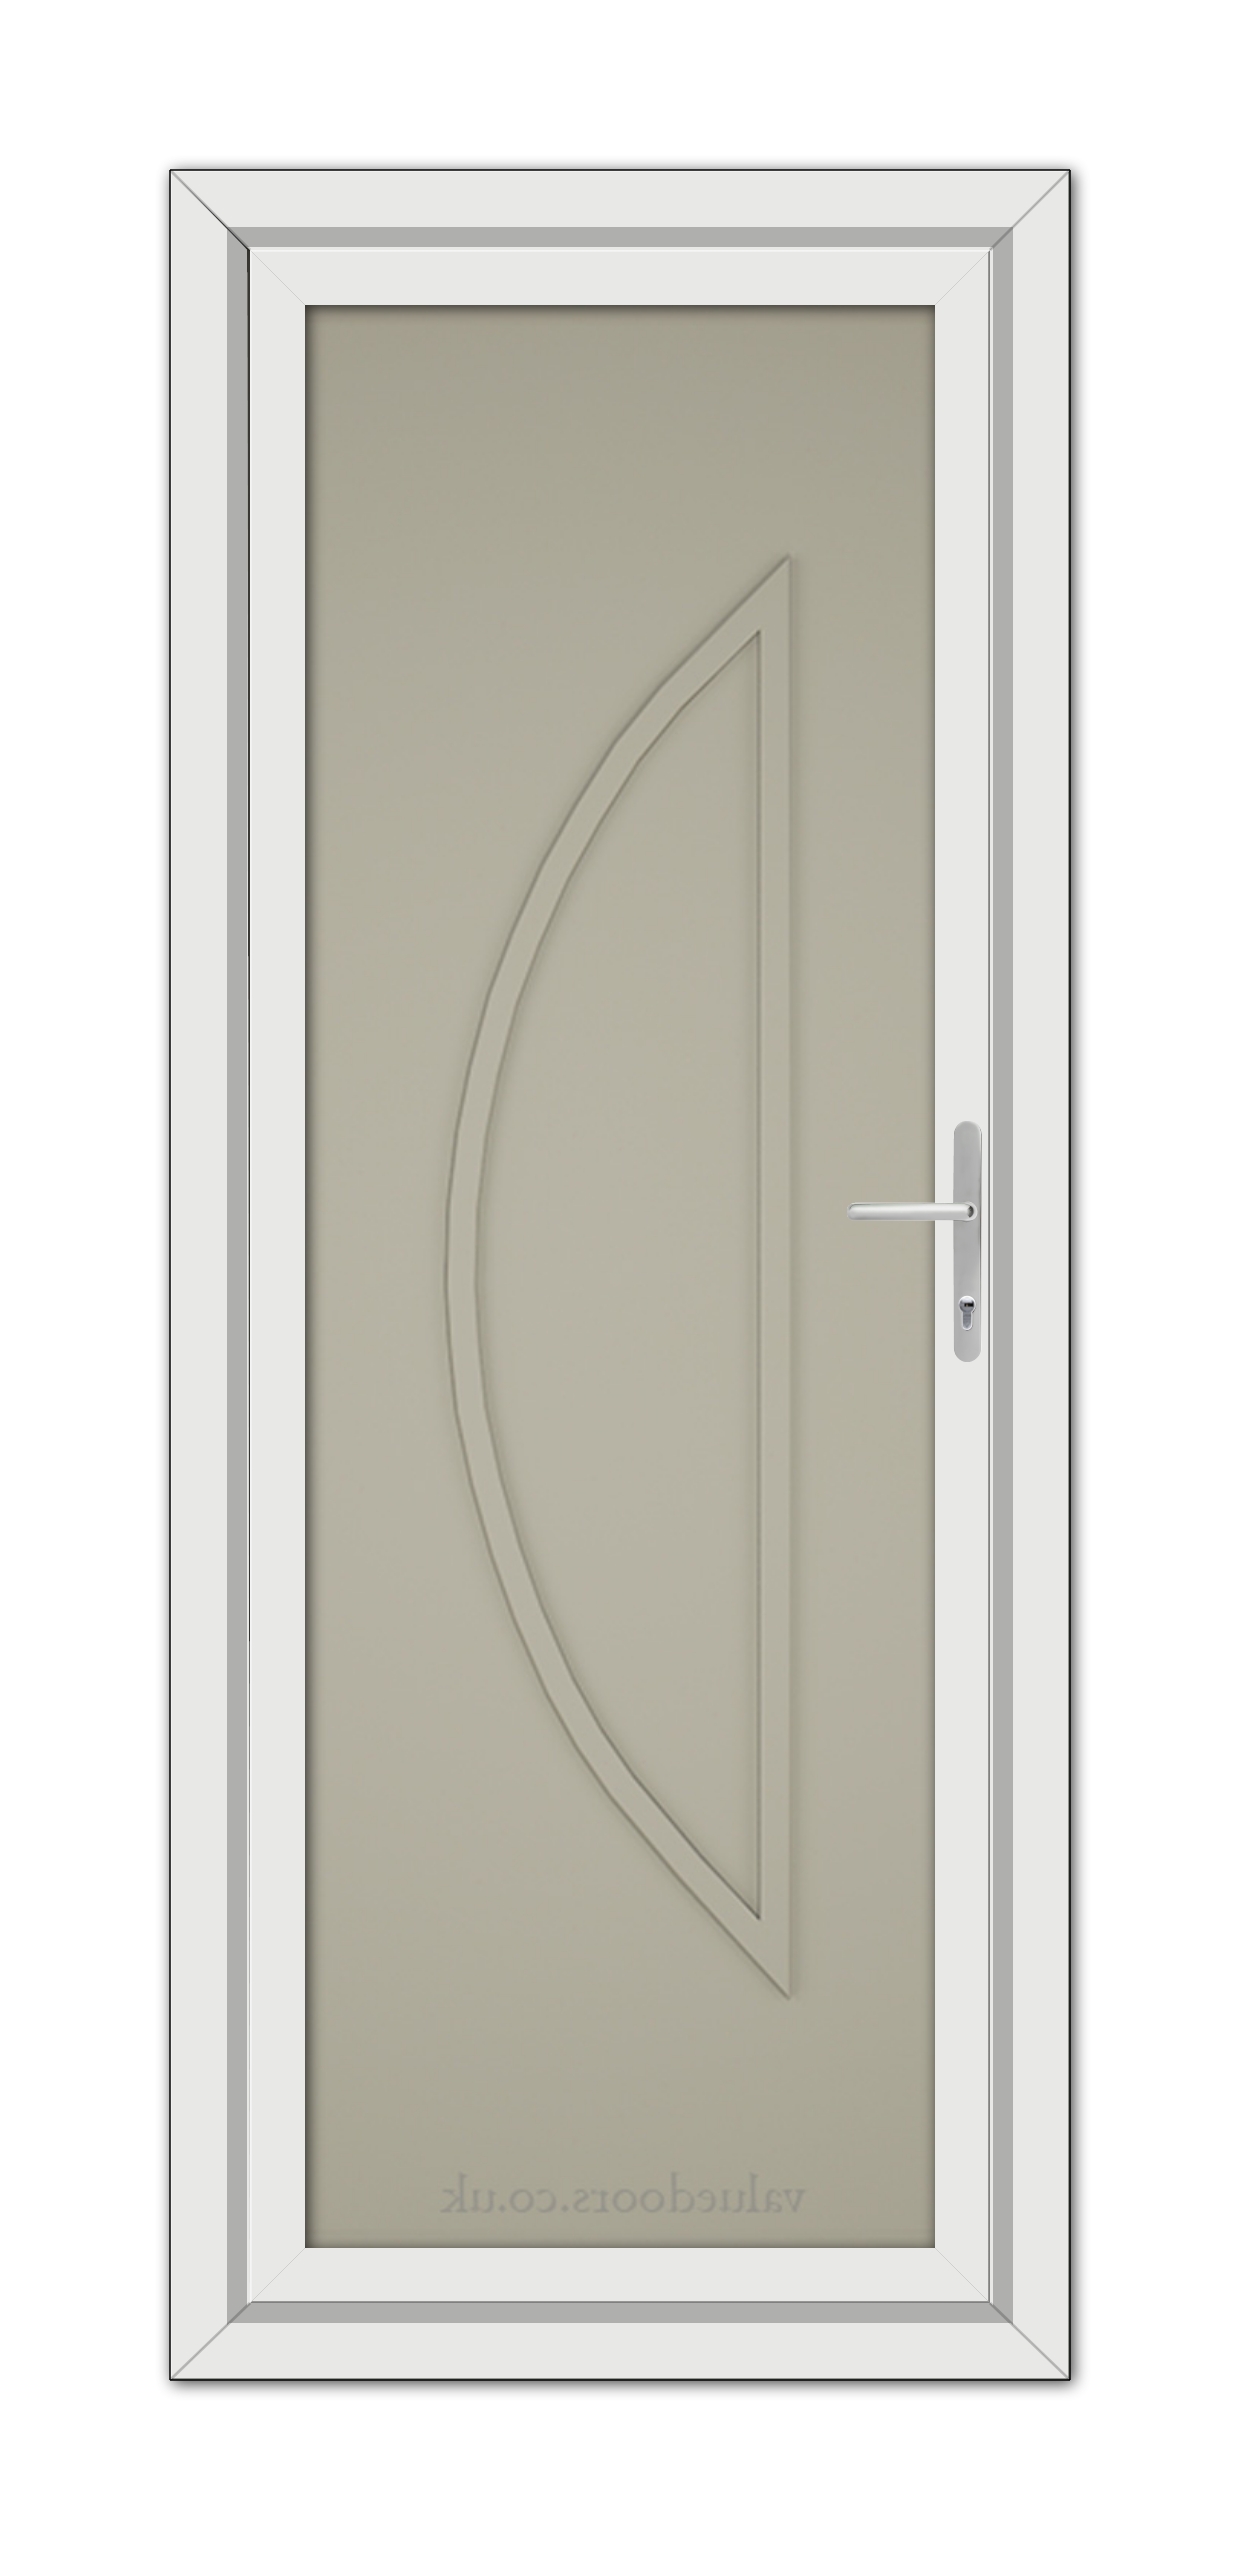 A vertical image of a Pebble Grey Modern 5051 Solid uPVC Door featuring a curved embossed design and a metallic handle, set within a simple frame.